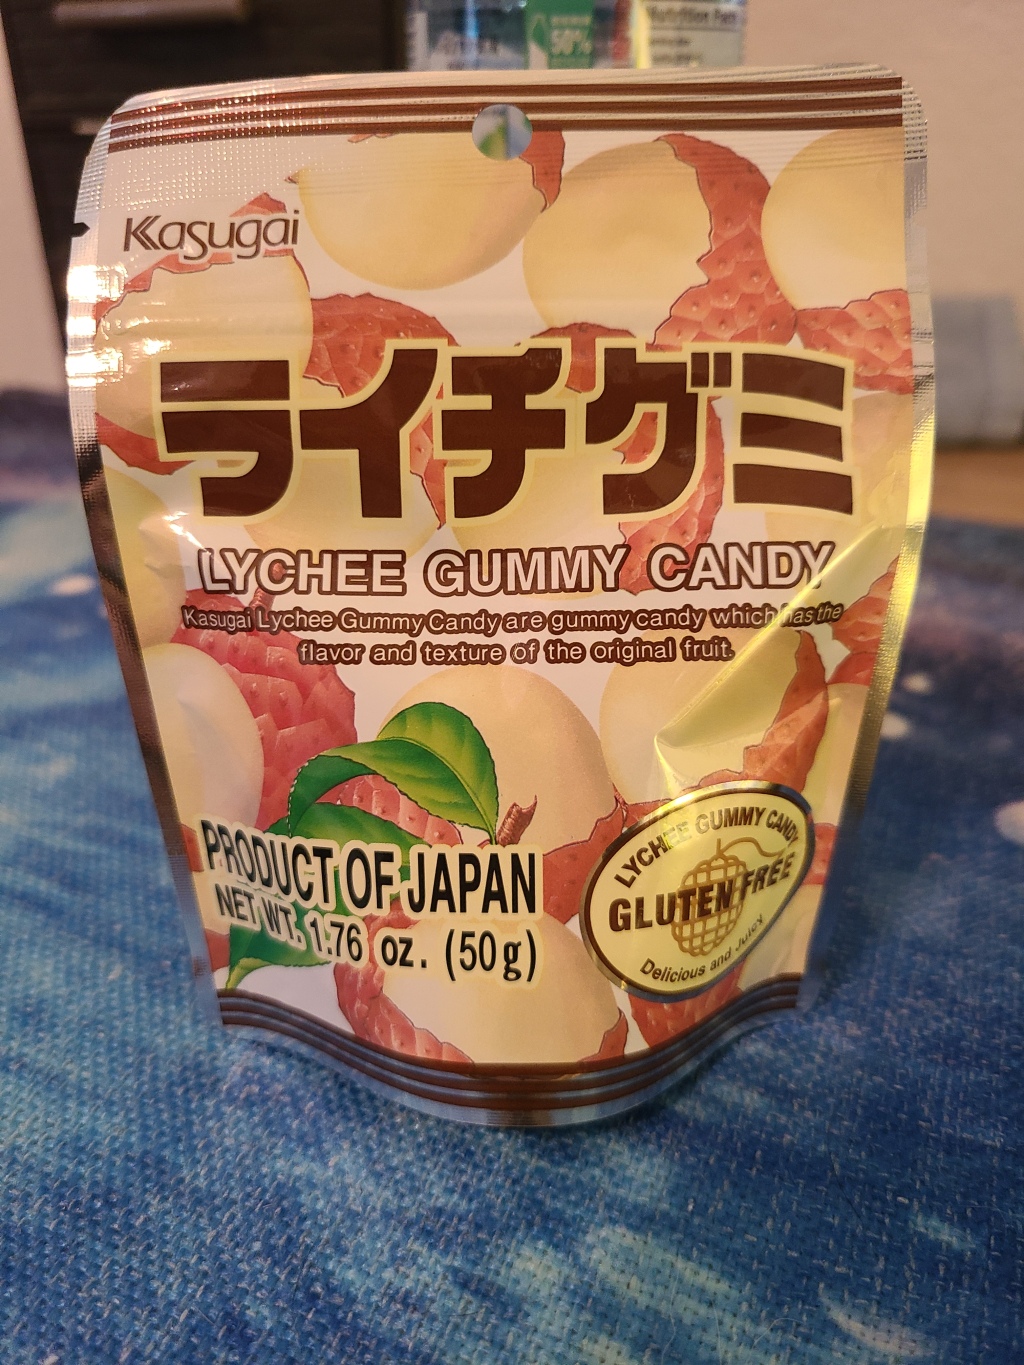 Candy Review: Kasugai Lychee Gummy Candy